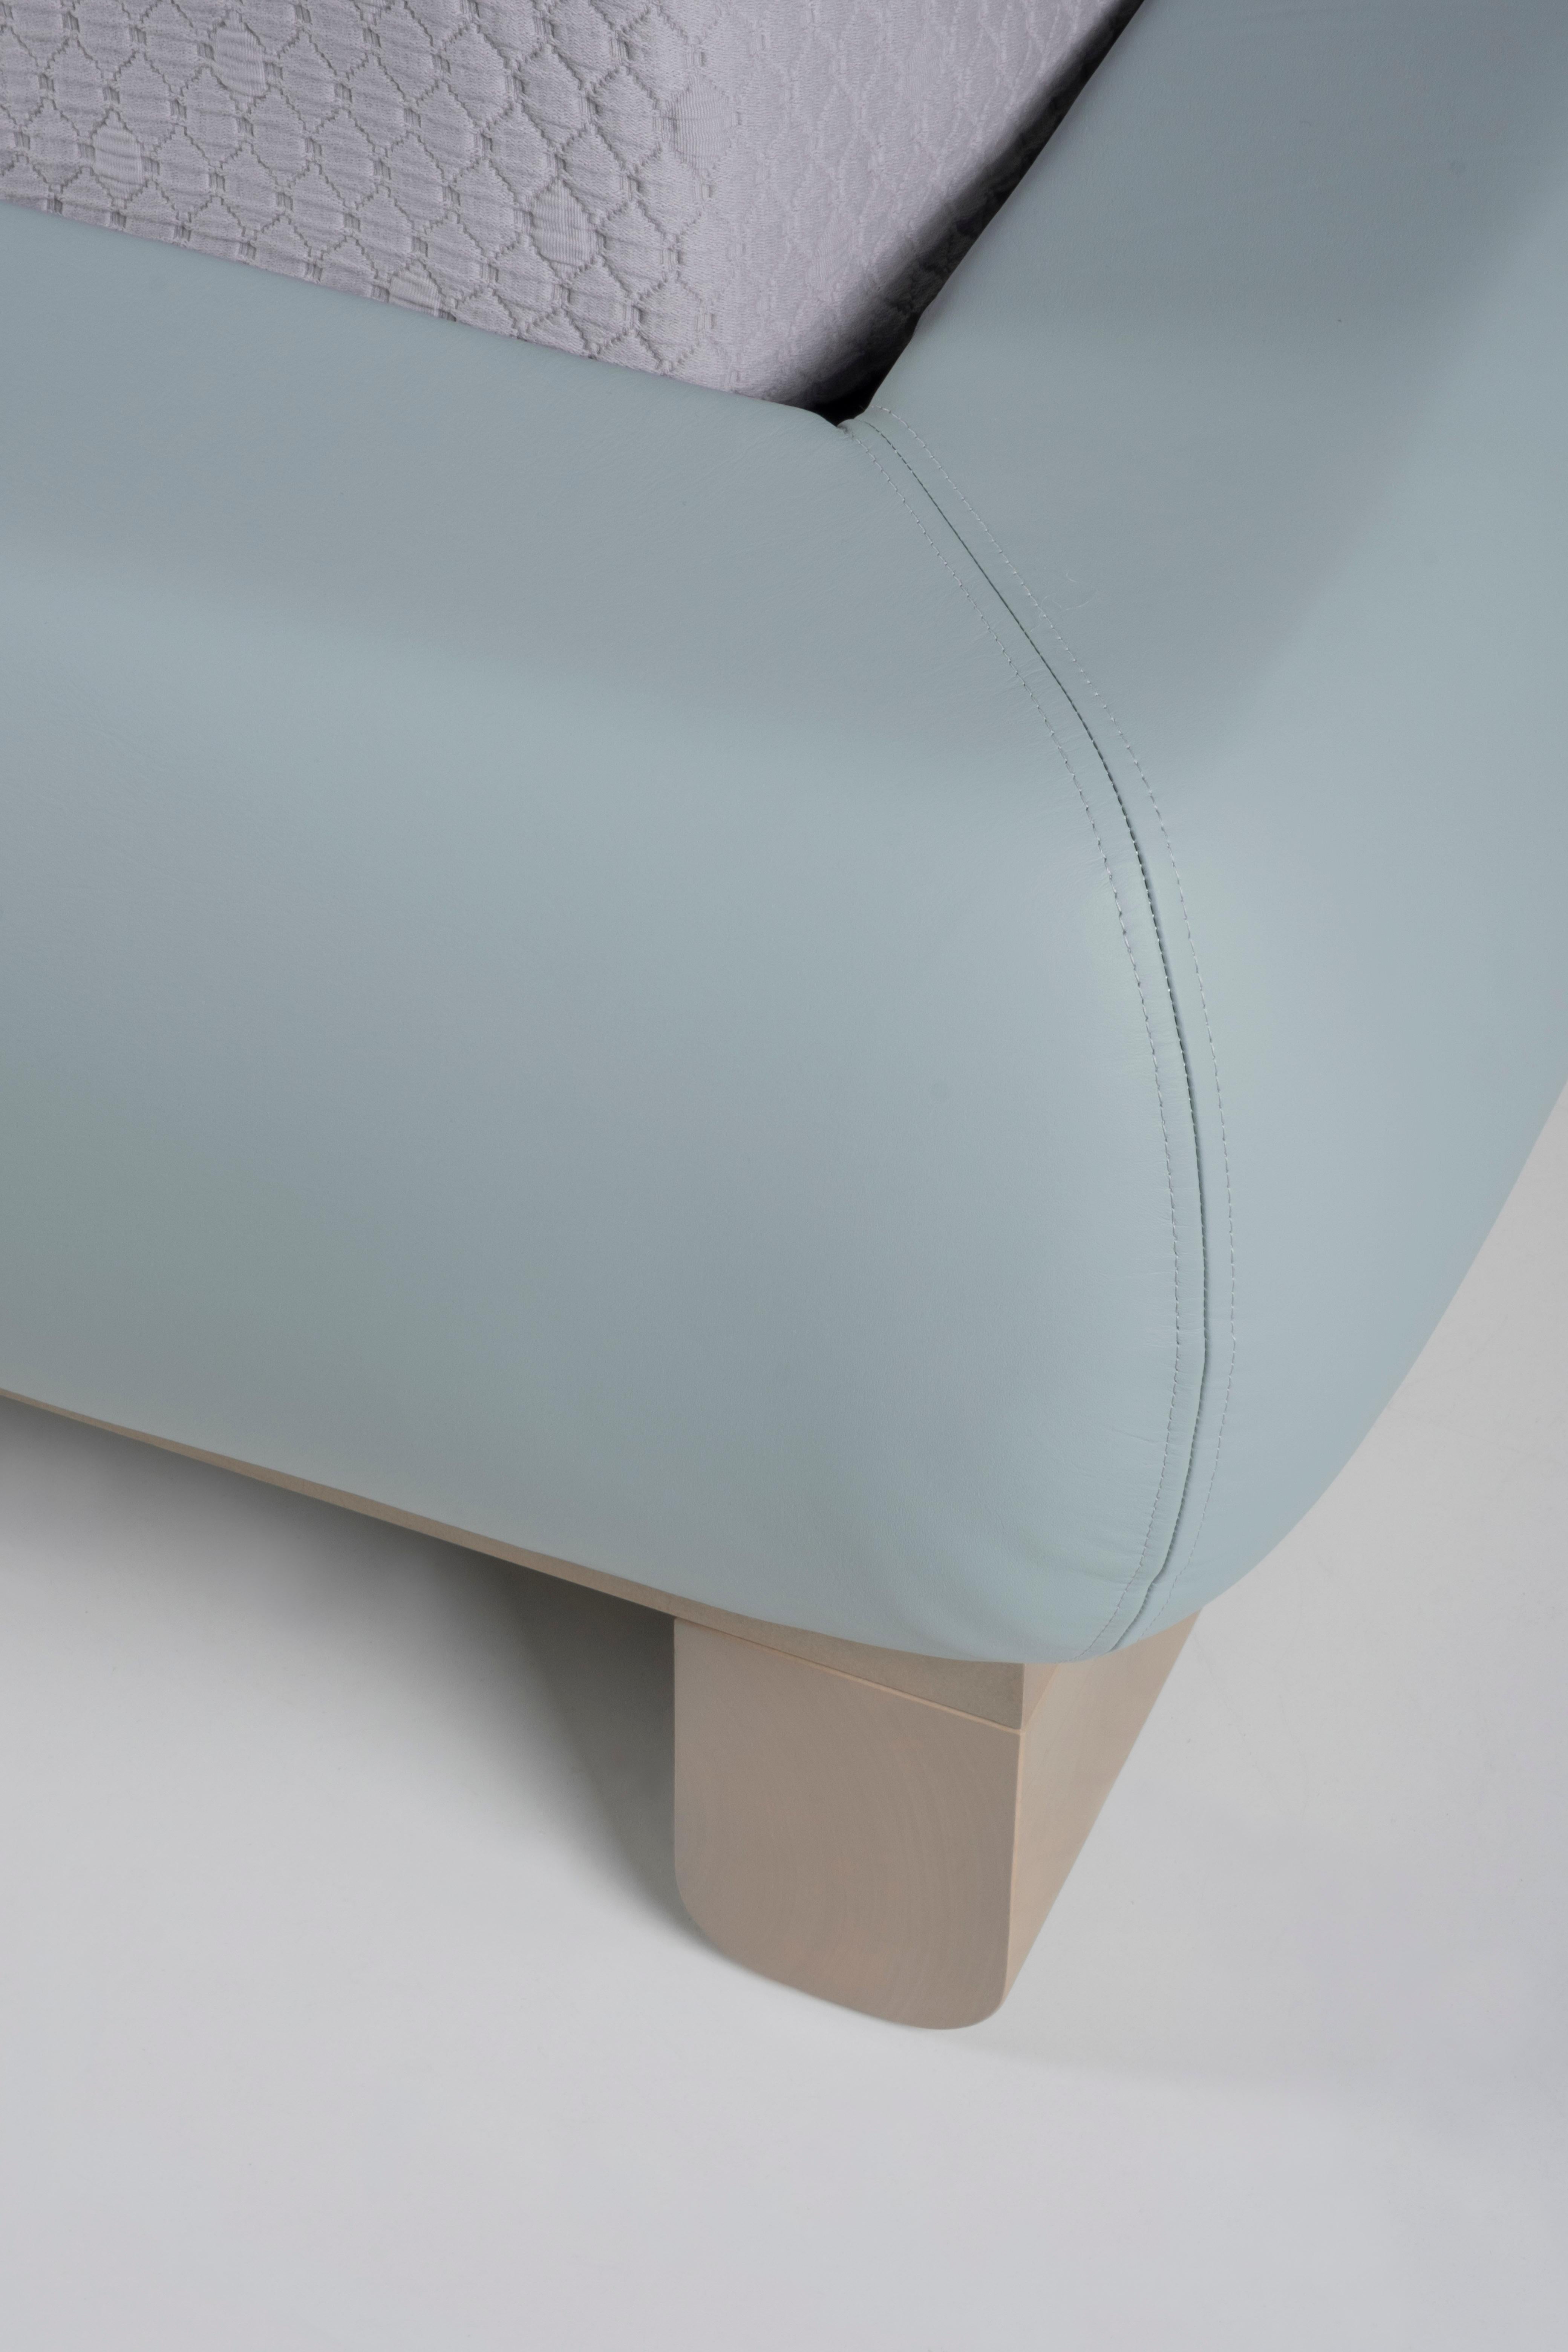 Contemporary Modern Hug Bed Light Blue Italian Leather Handmade in Portugal by Greenapple For Sale